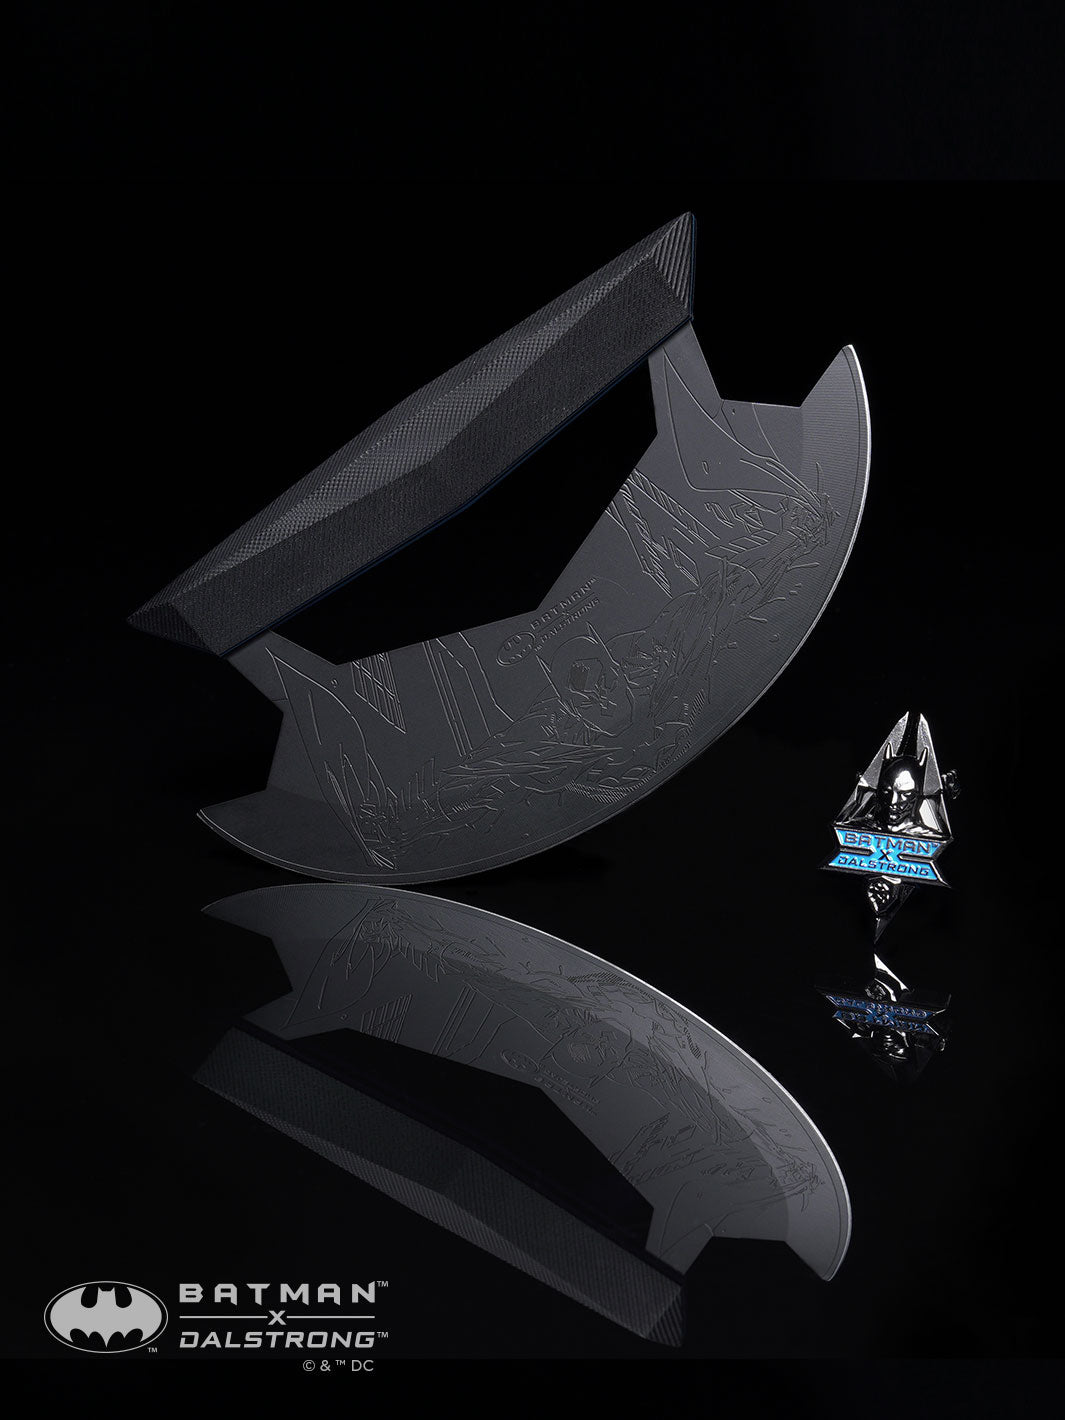 Dalstrong shadow black series batman edition 7 inch ulu knife with it's pin.